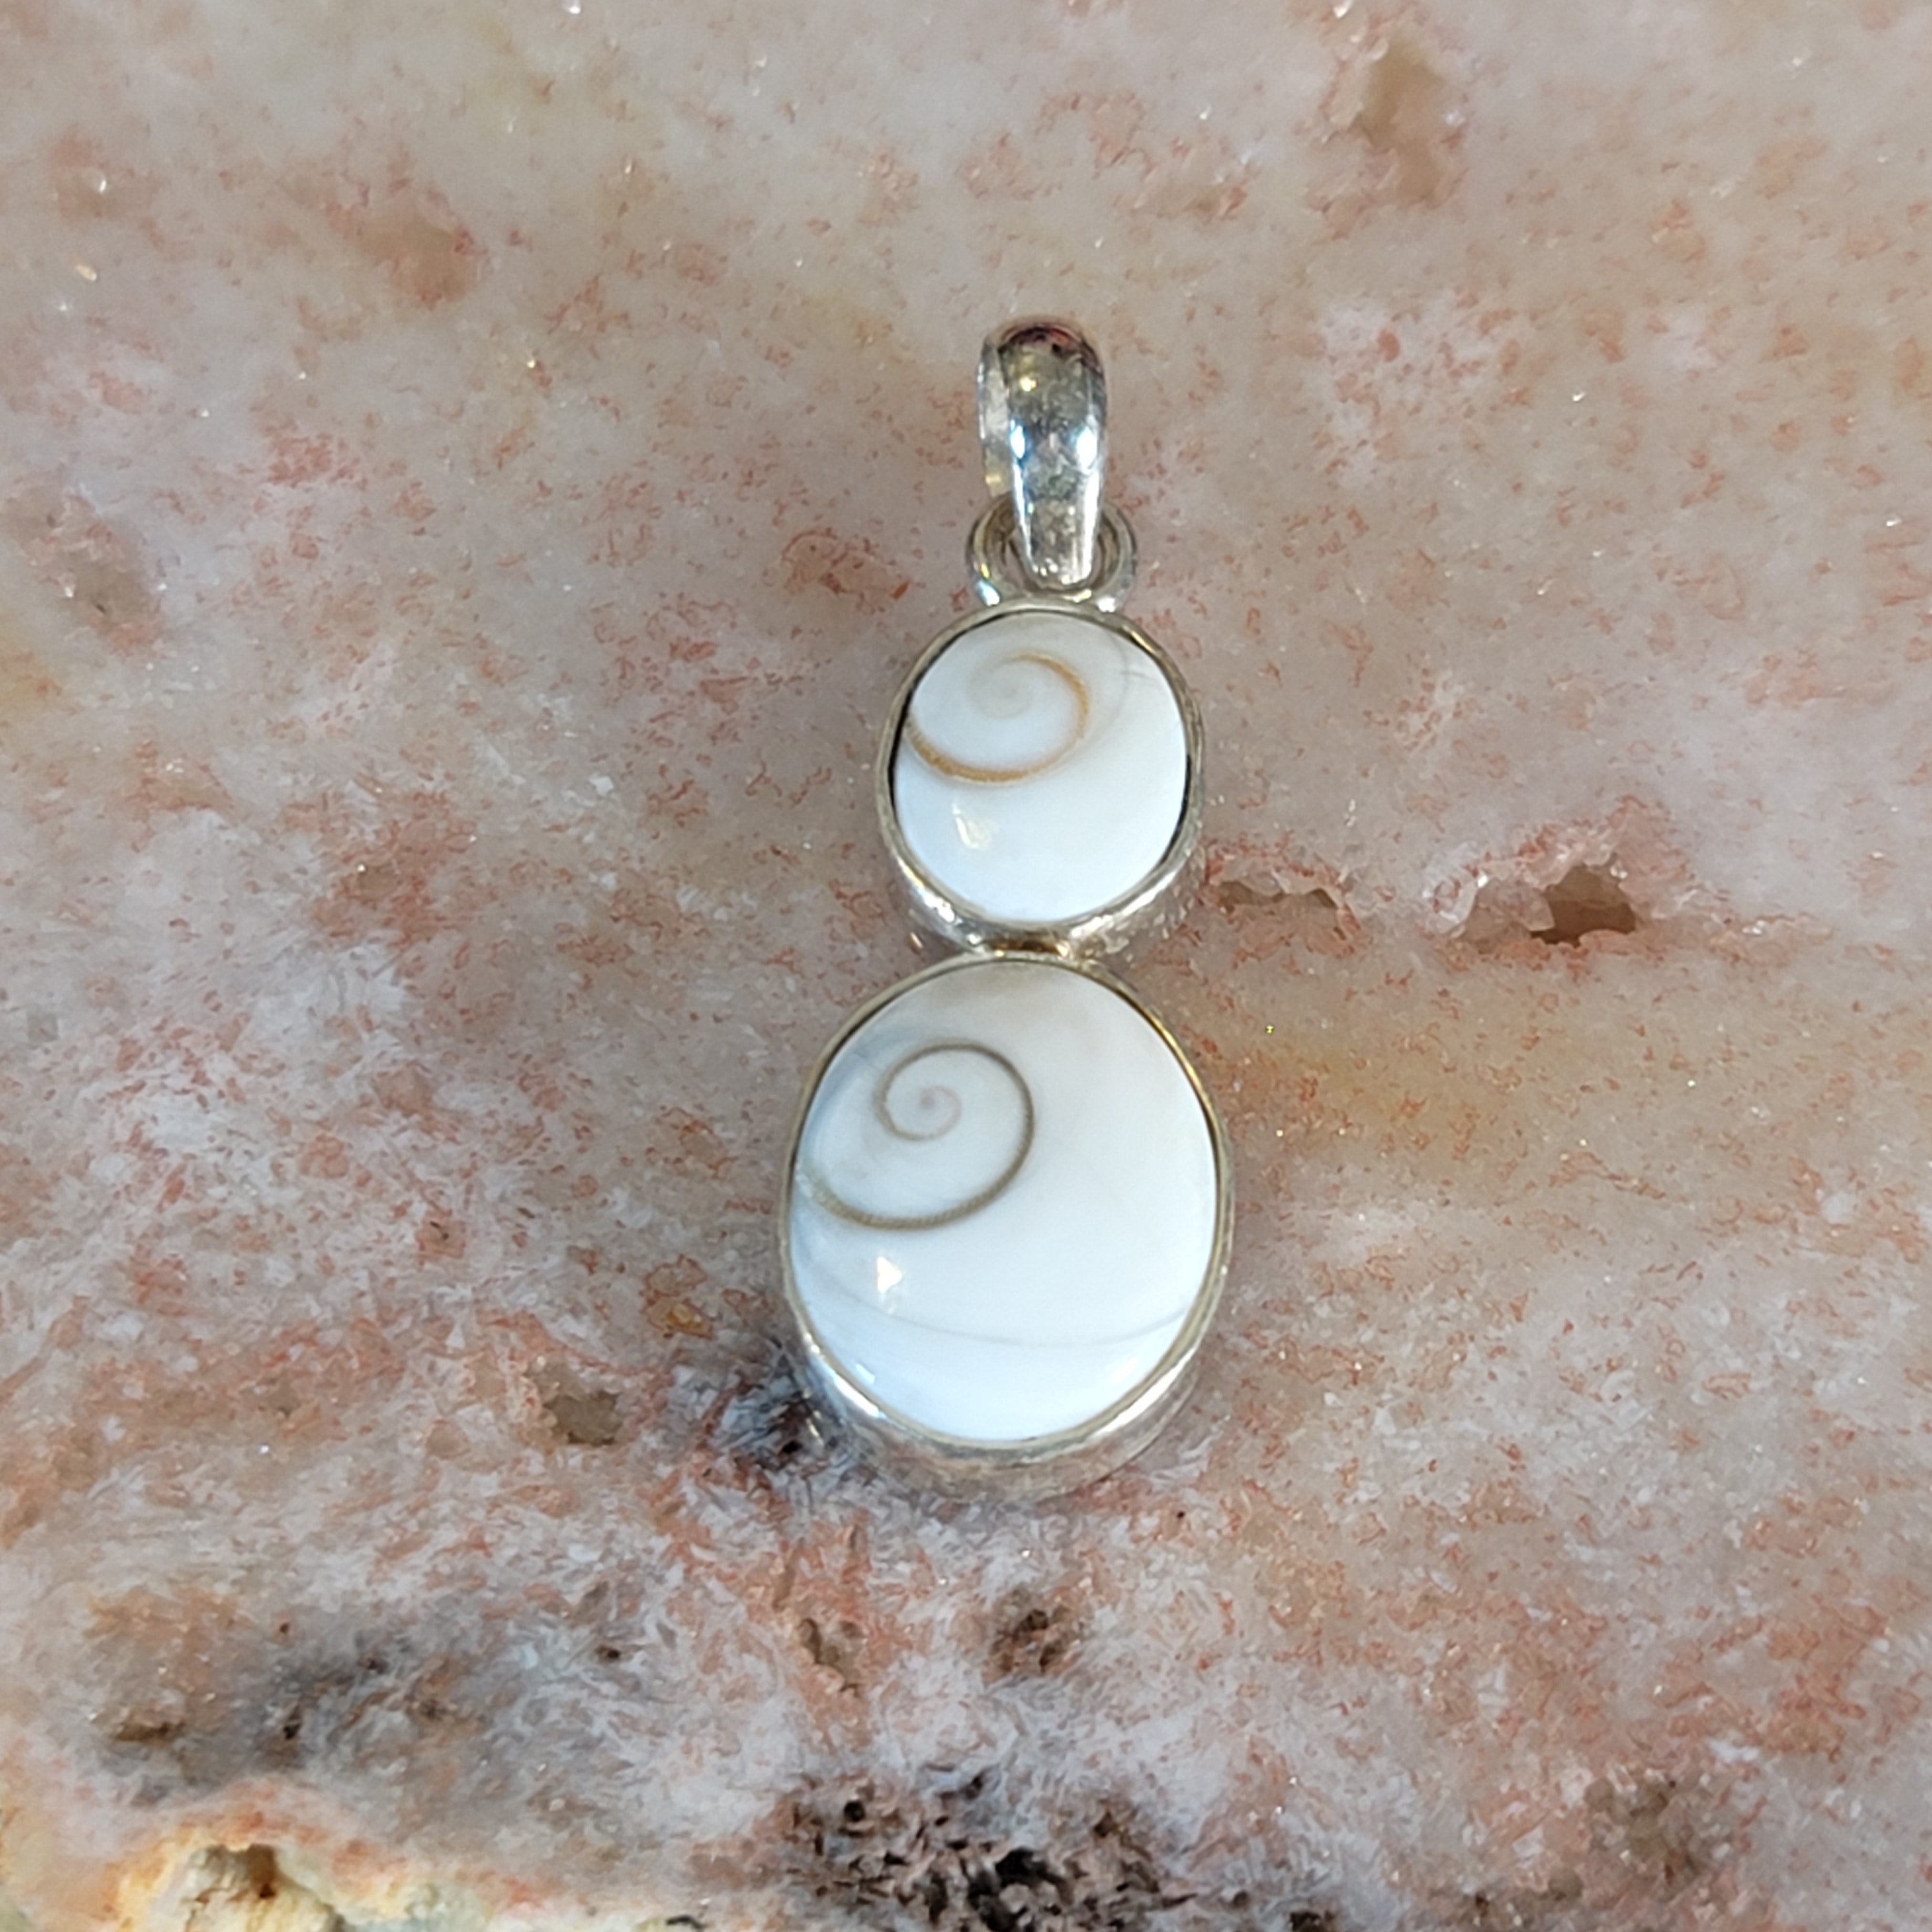 Shiva Shell Pendant .925 Silver for Connection and Spiritual Knowledge